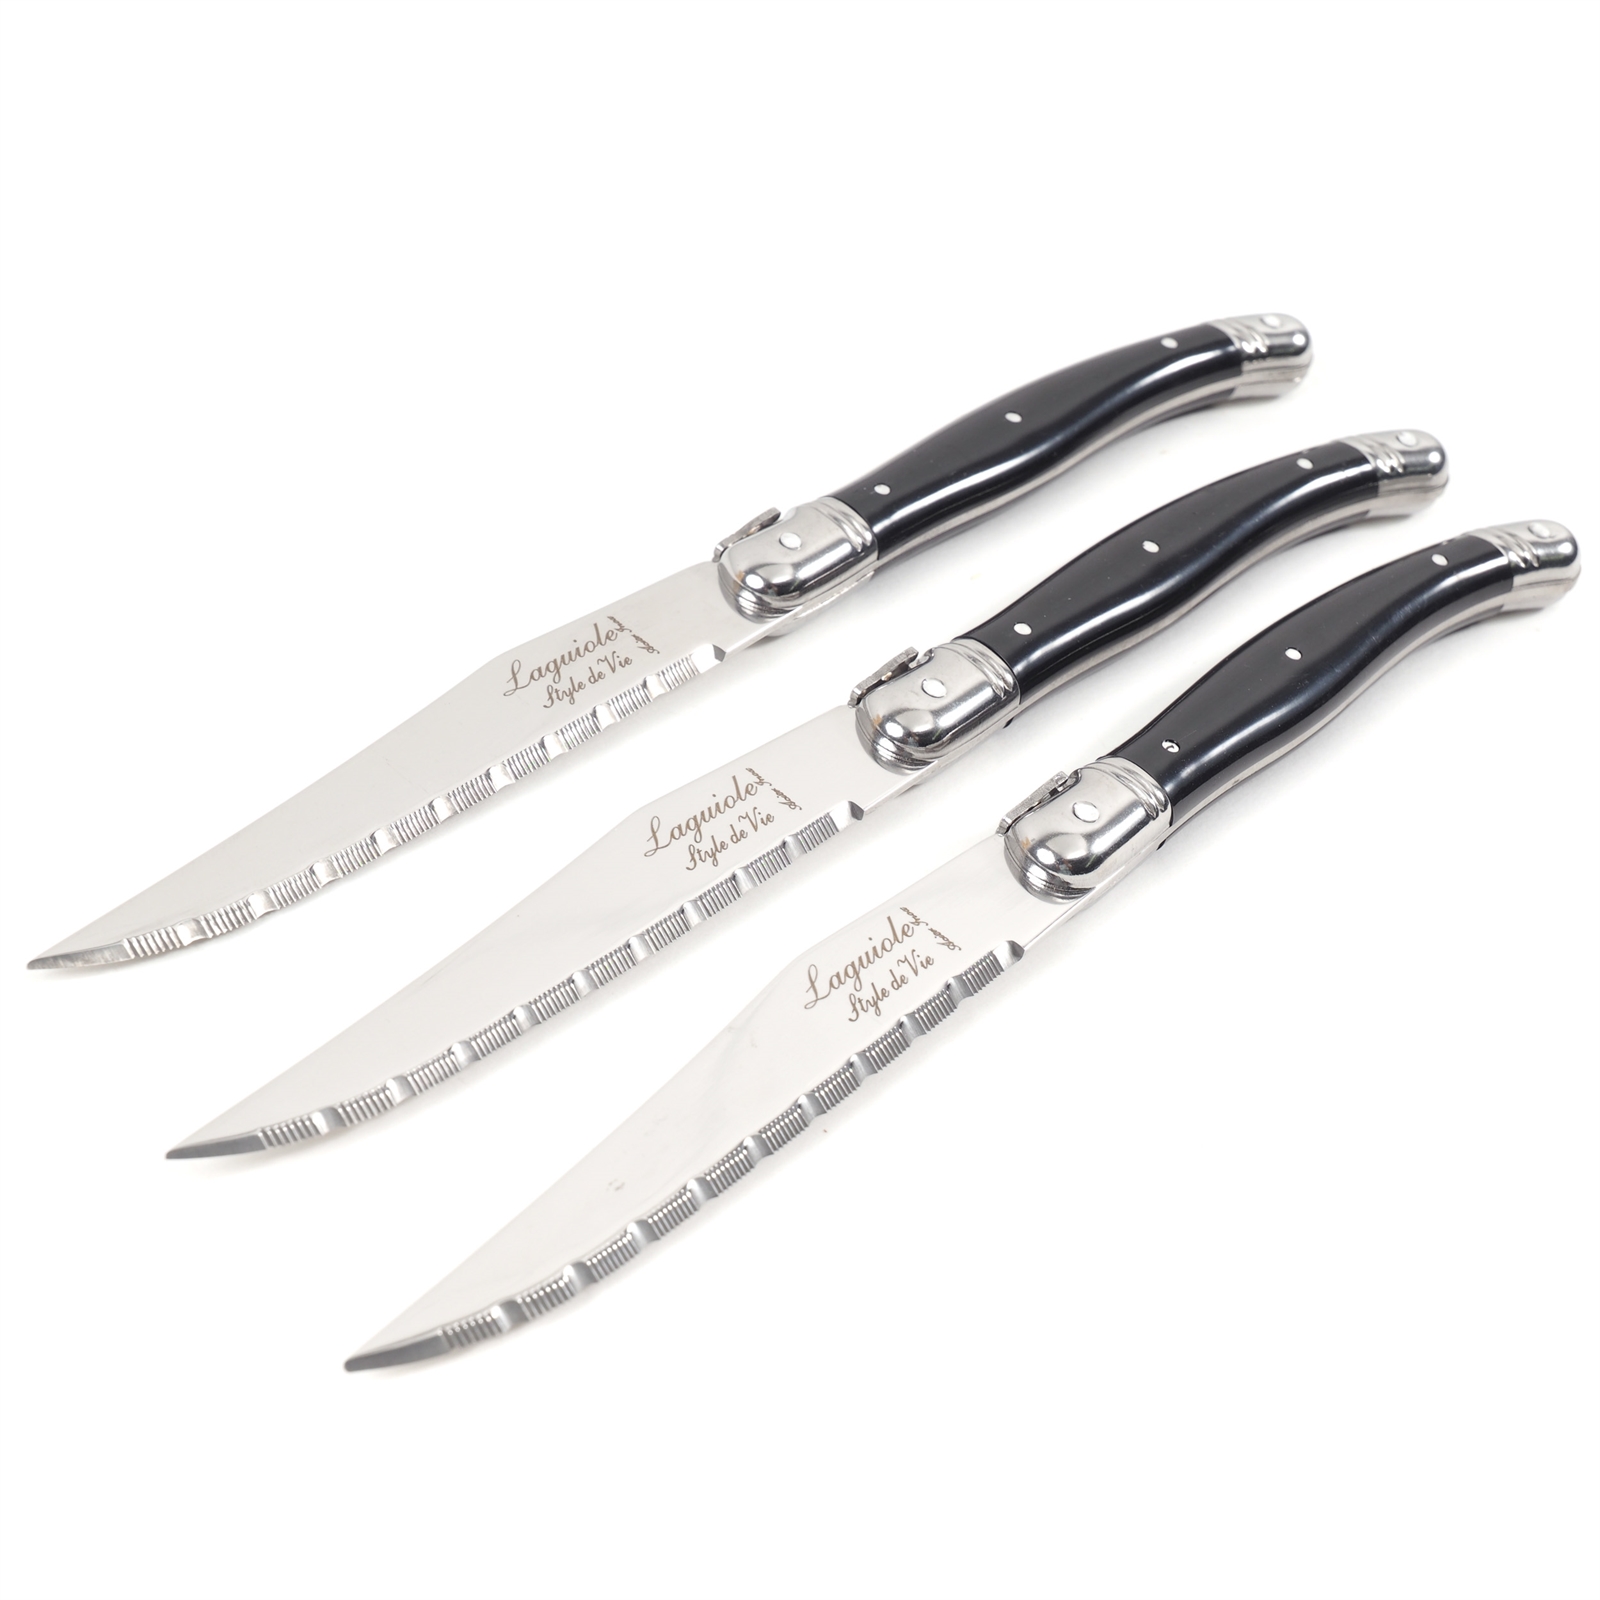 6 LAGUIOLE STEAK KNIVES "SCURO" | stainless steel, black | knife set in Laguiole Stainless Steel Steak Knives